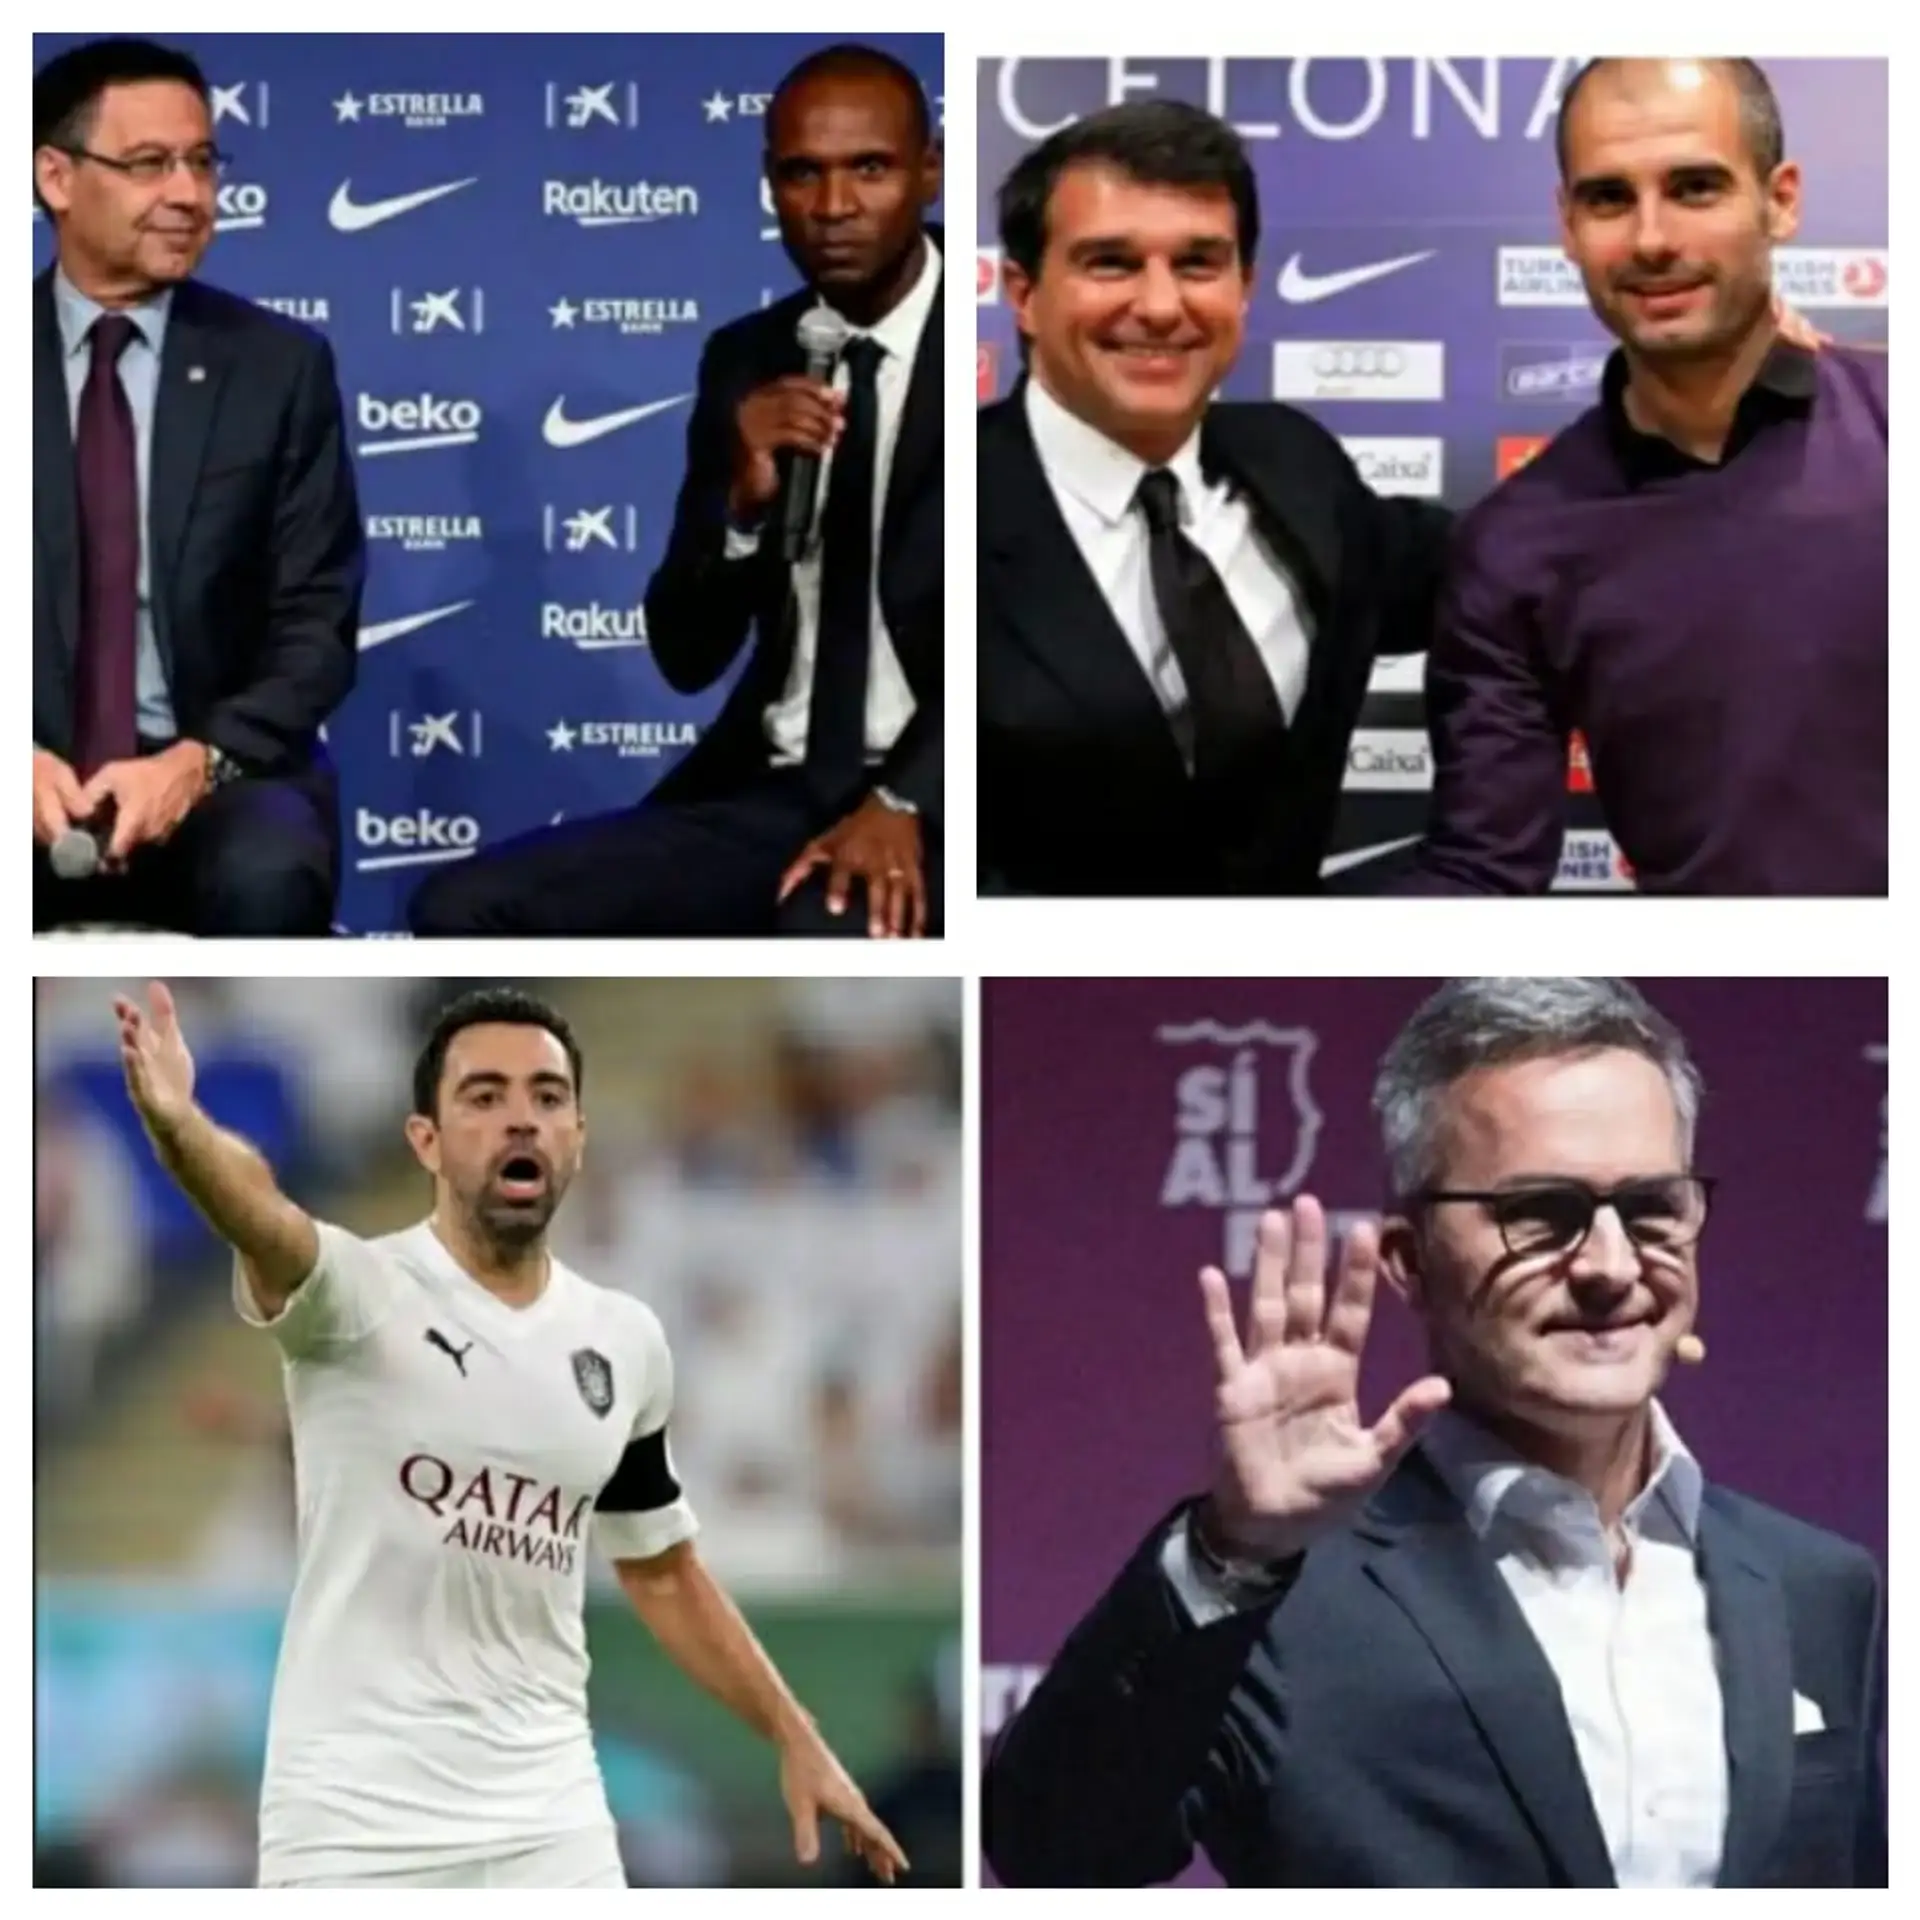 Who should be the next President of Barca?